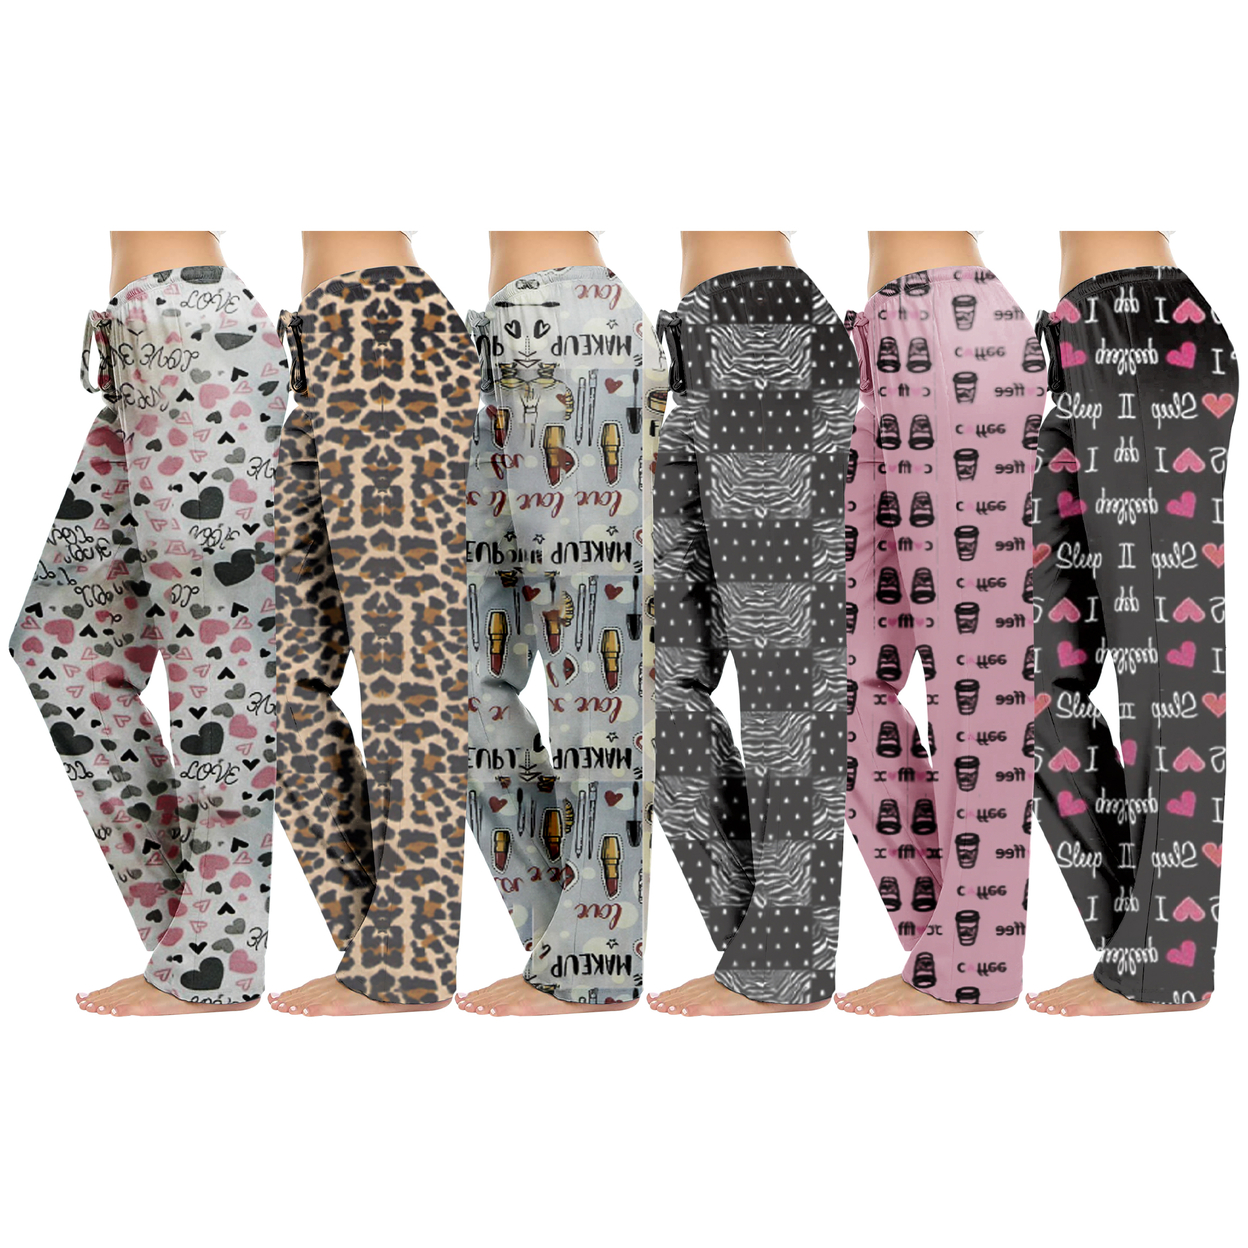 3-Pack: Women's Casual Fun Printed Lightweight Lounge Terry Knit Pajama Bottom Pants - X-large, Shapes